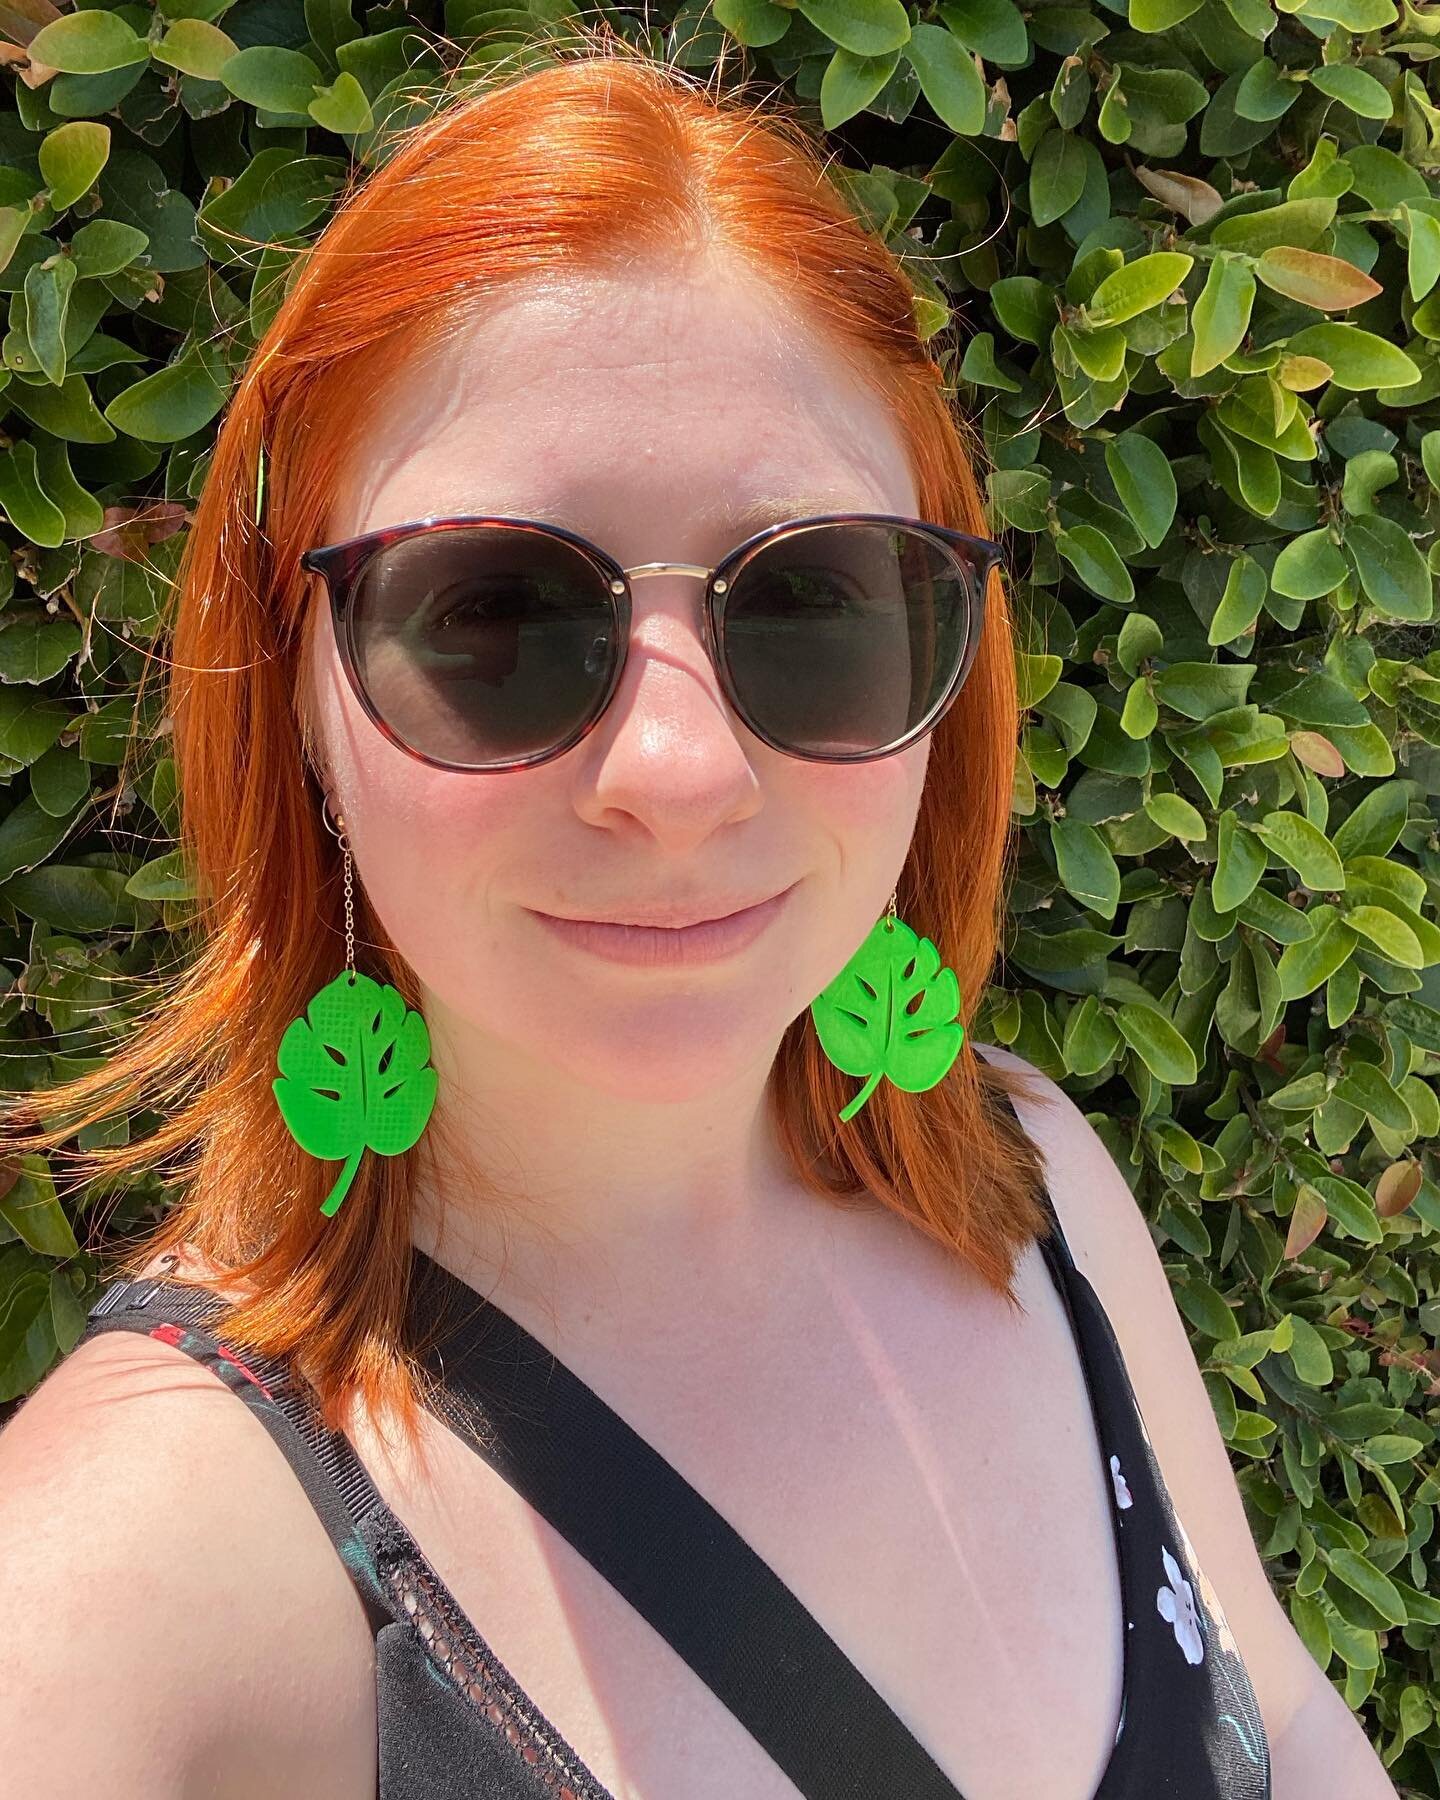 First day of Summer! Excited to wear a new jumpsuit, I paired it with my favorite Monstera earrings! (Shop in Bio) #firstdayofsummer #monstera #earrings #earringsoftheday #arttechbabe #handmadejewelry